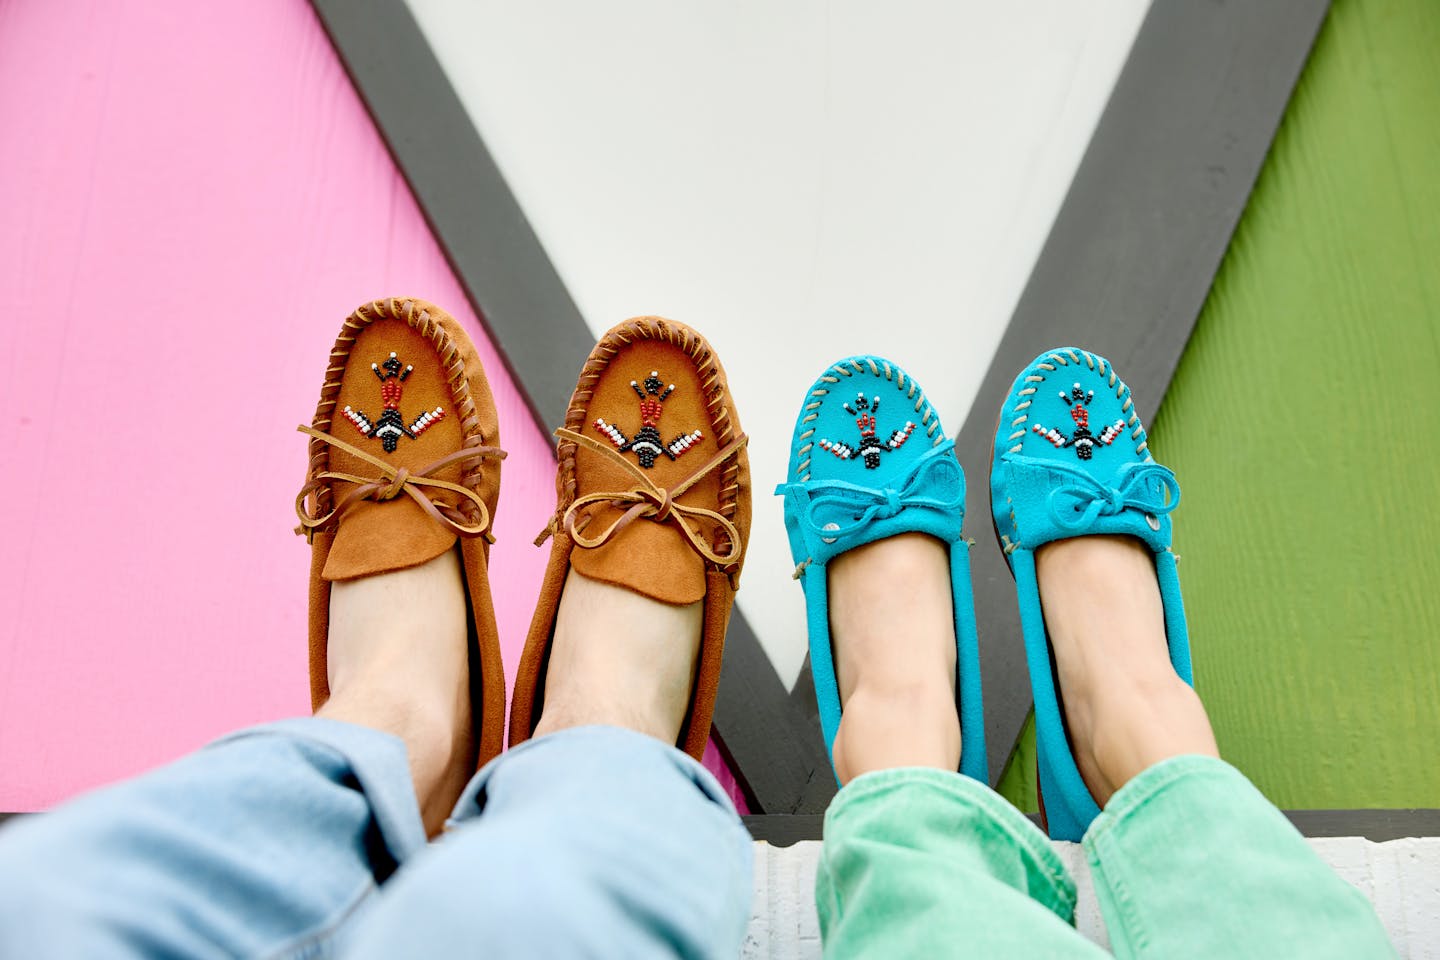 Minnetonka moccasins relaunches most well-known style after